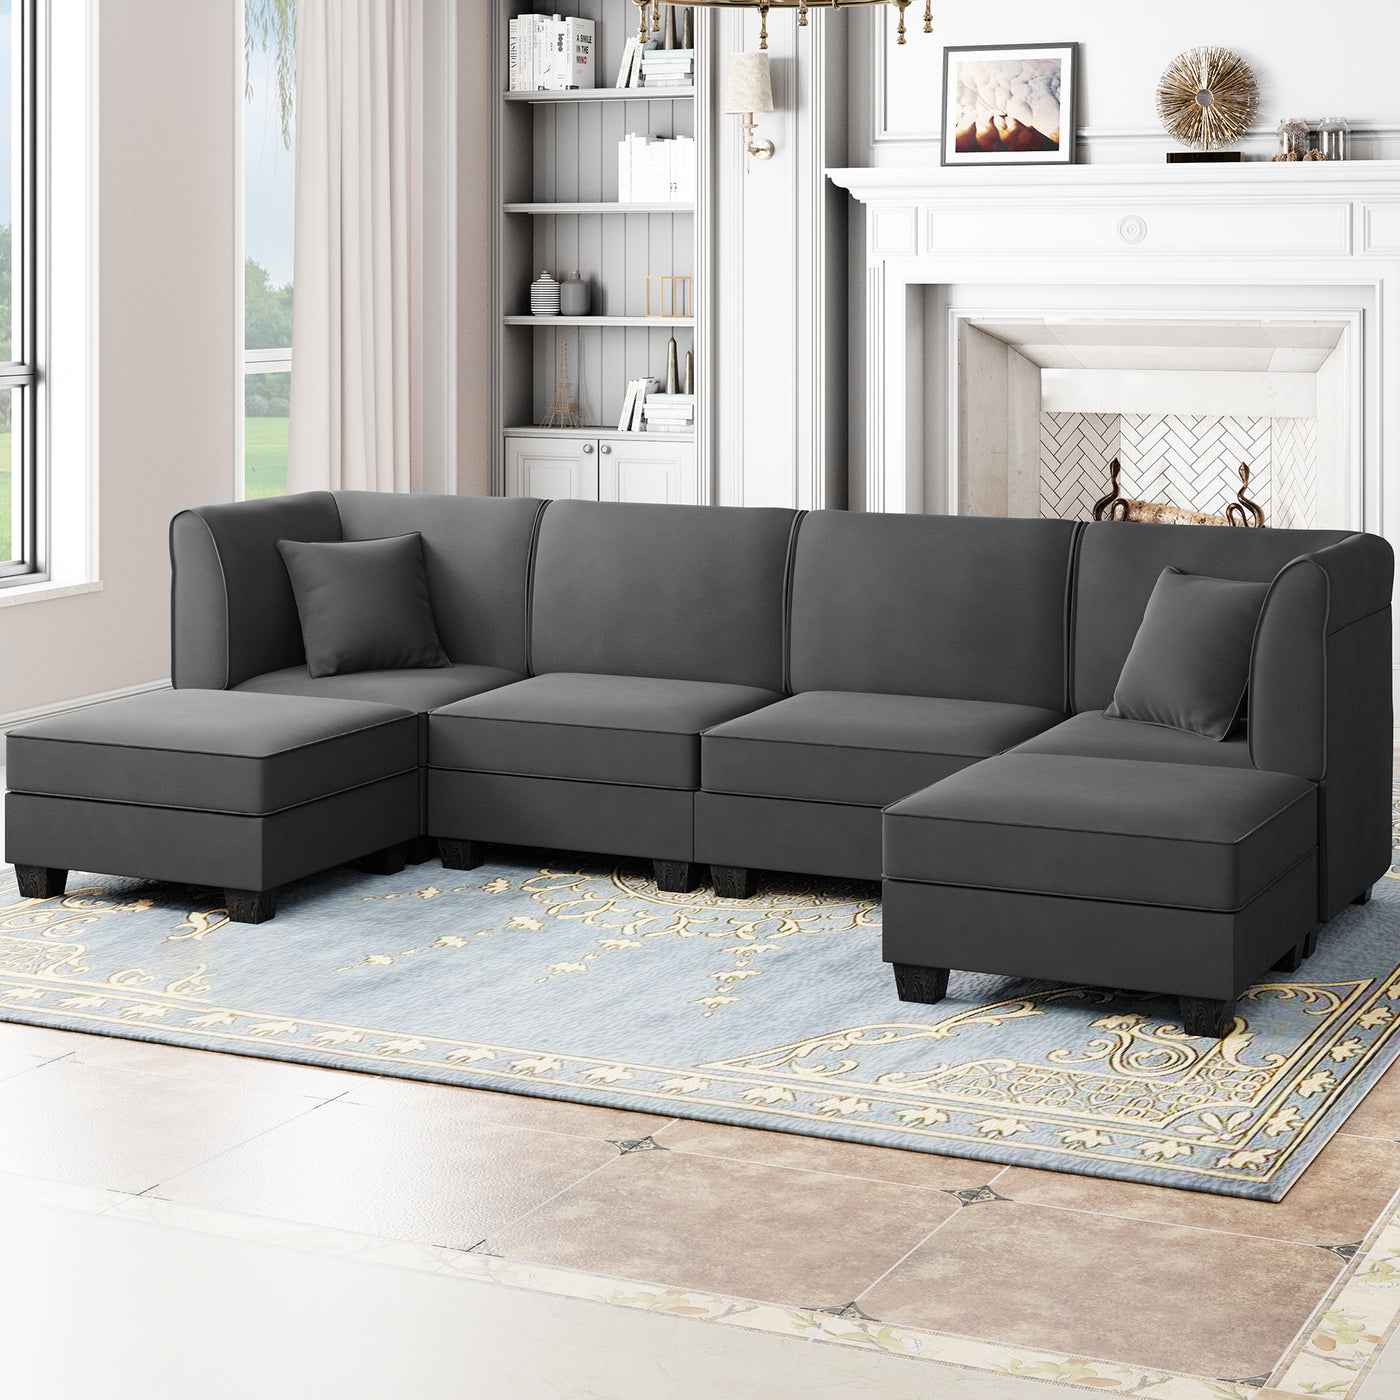 Walsunny  U-Shape Convertible Sectional Sofa Couch with 6 Seats